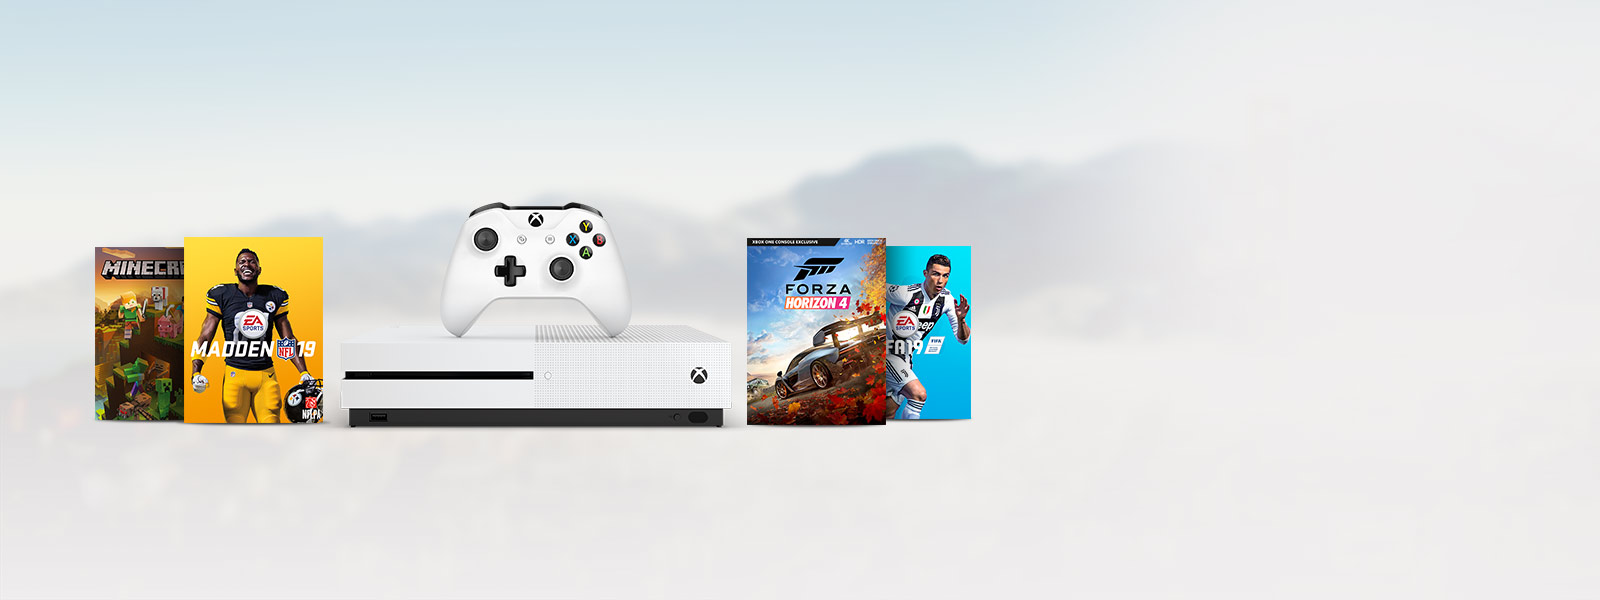 video games for xbox one s